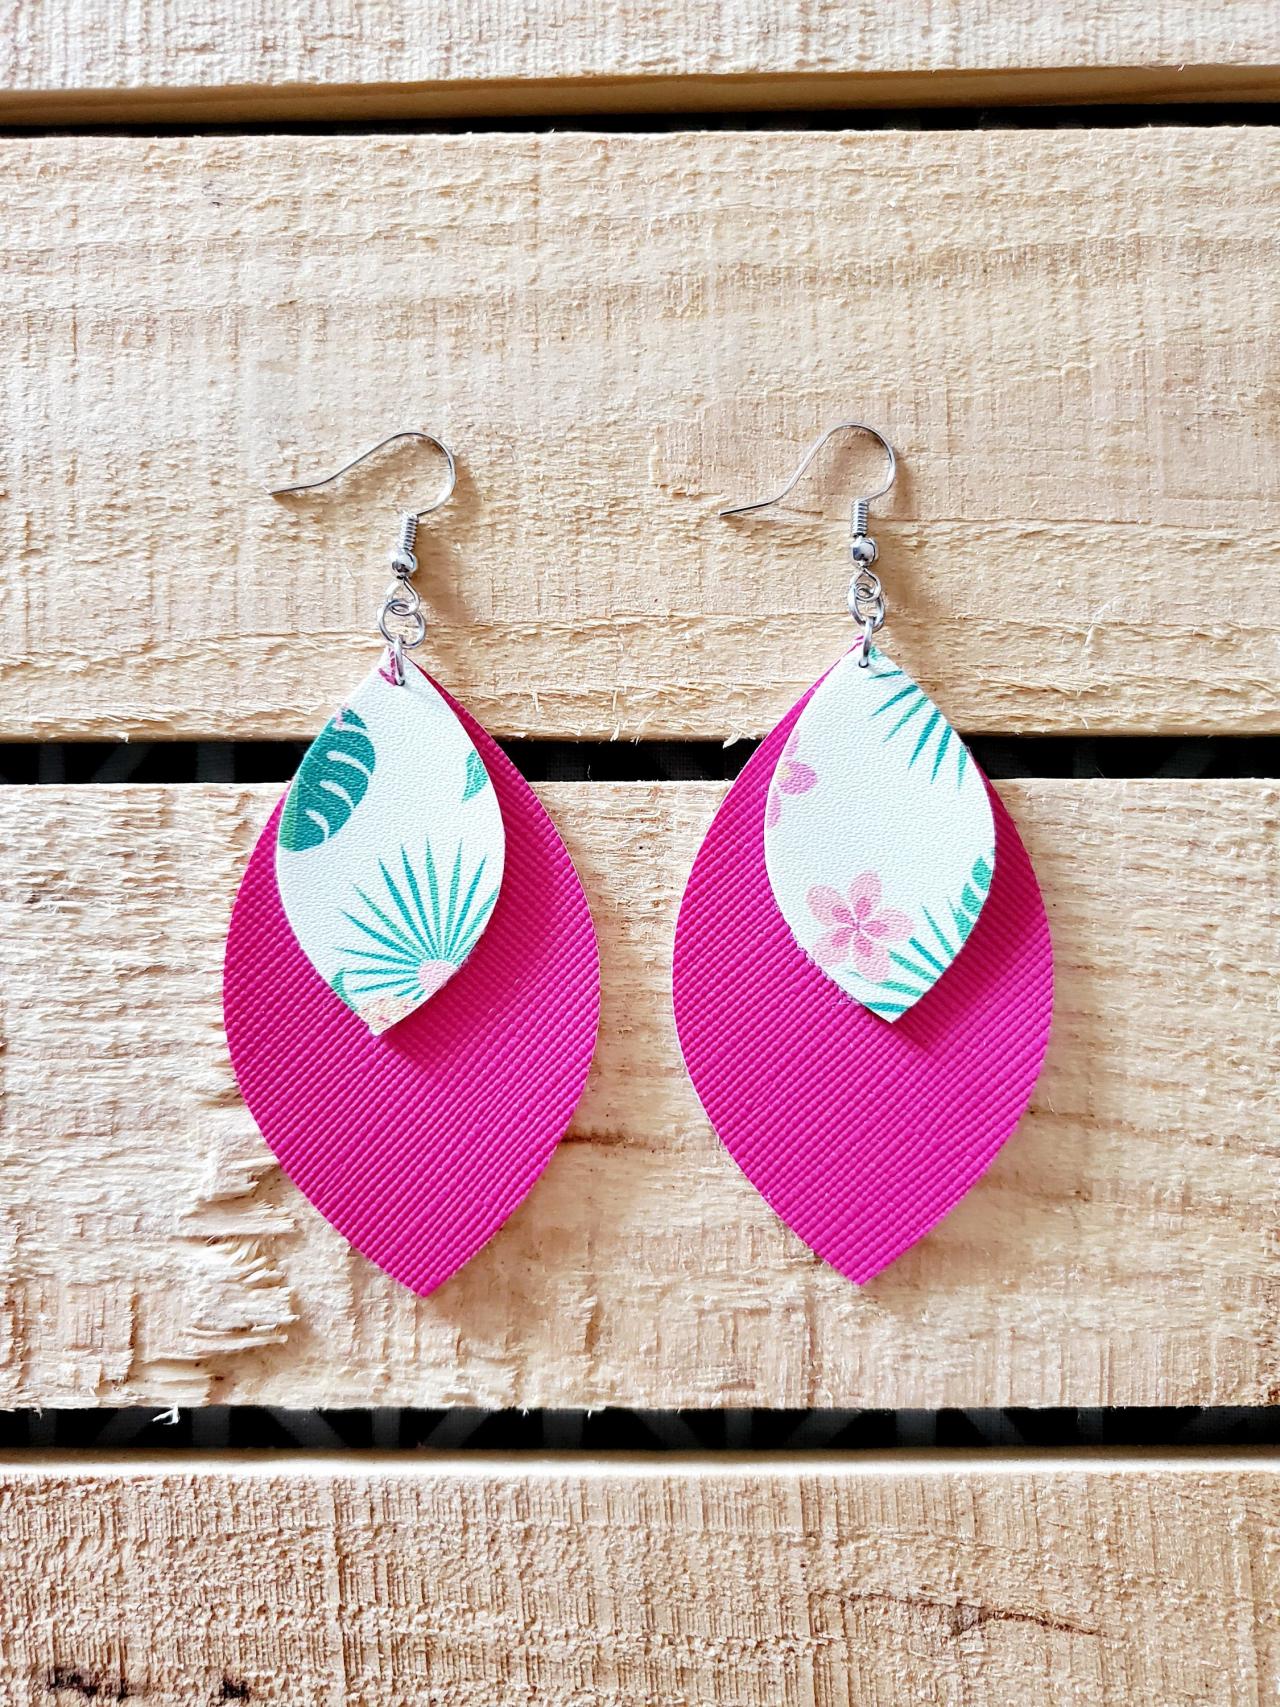 Tropical Floral Leather Earrings, Double Layer Earrings, Boho Chic Earrings, Pink Leather Jewelry, Floral Earrings, Statement Earrings